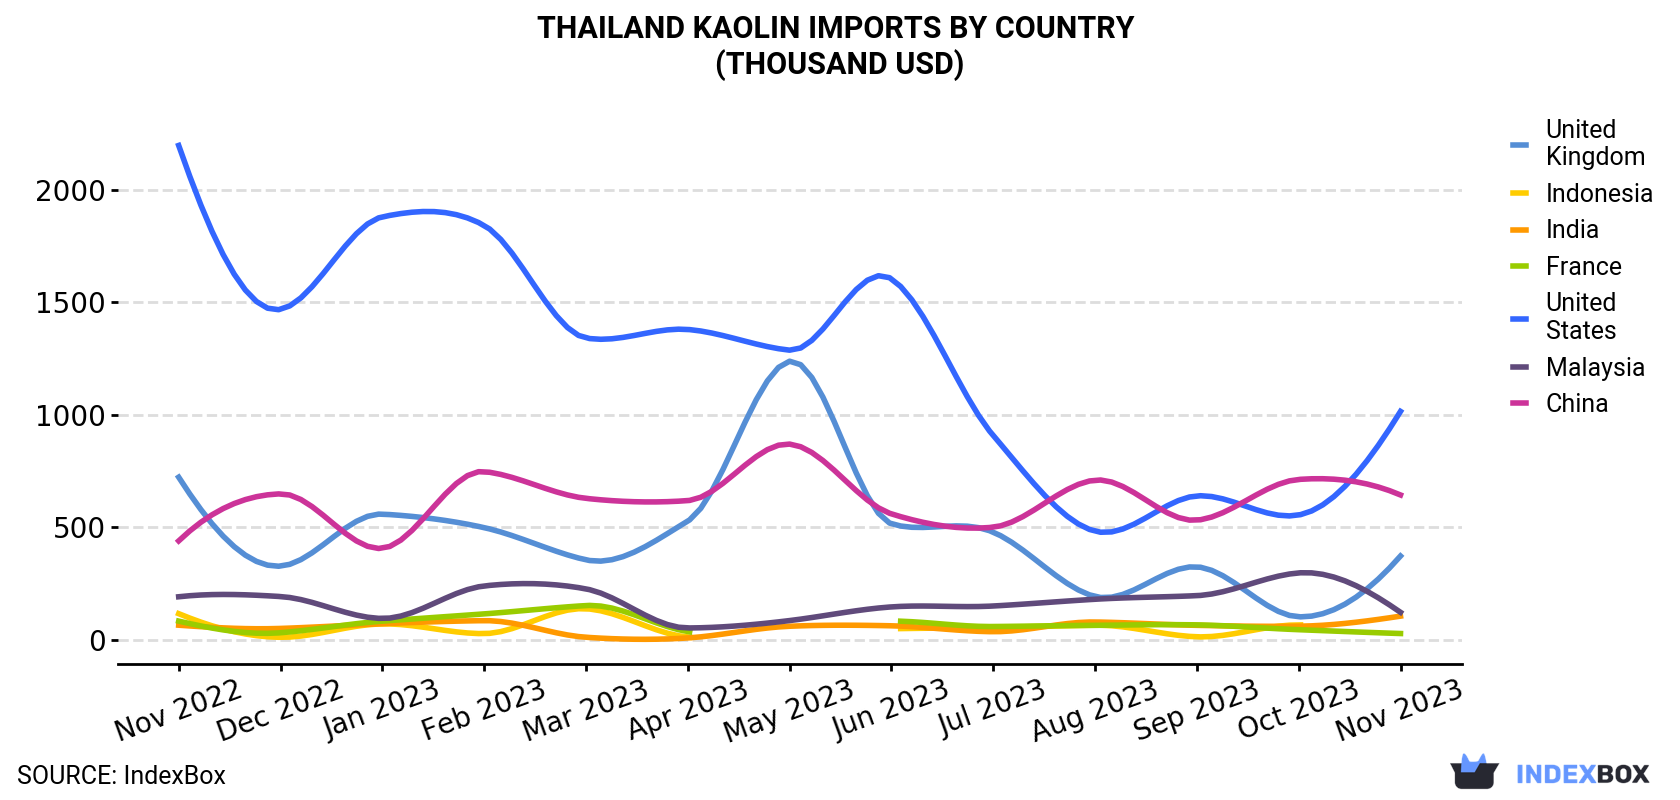 Thailand Kaolin Imports By Country (Thousand USD)